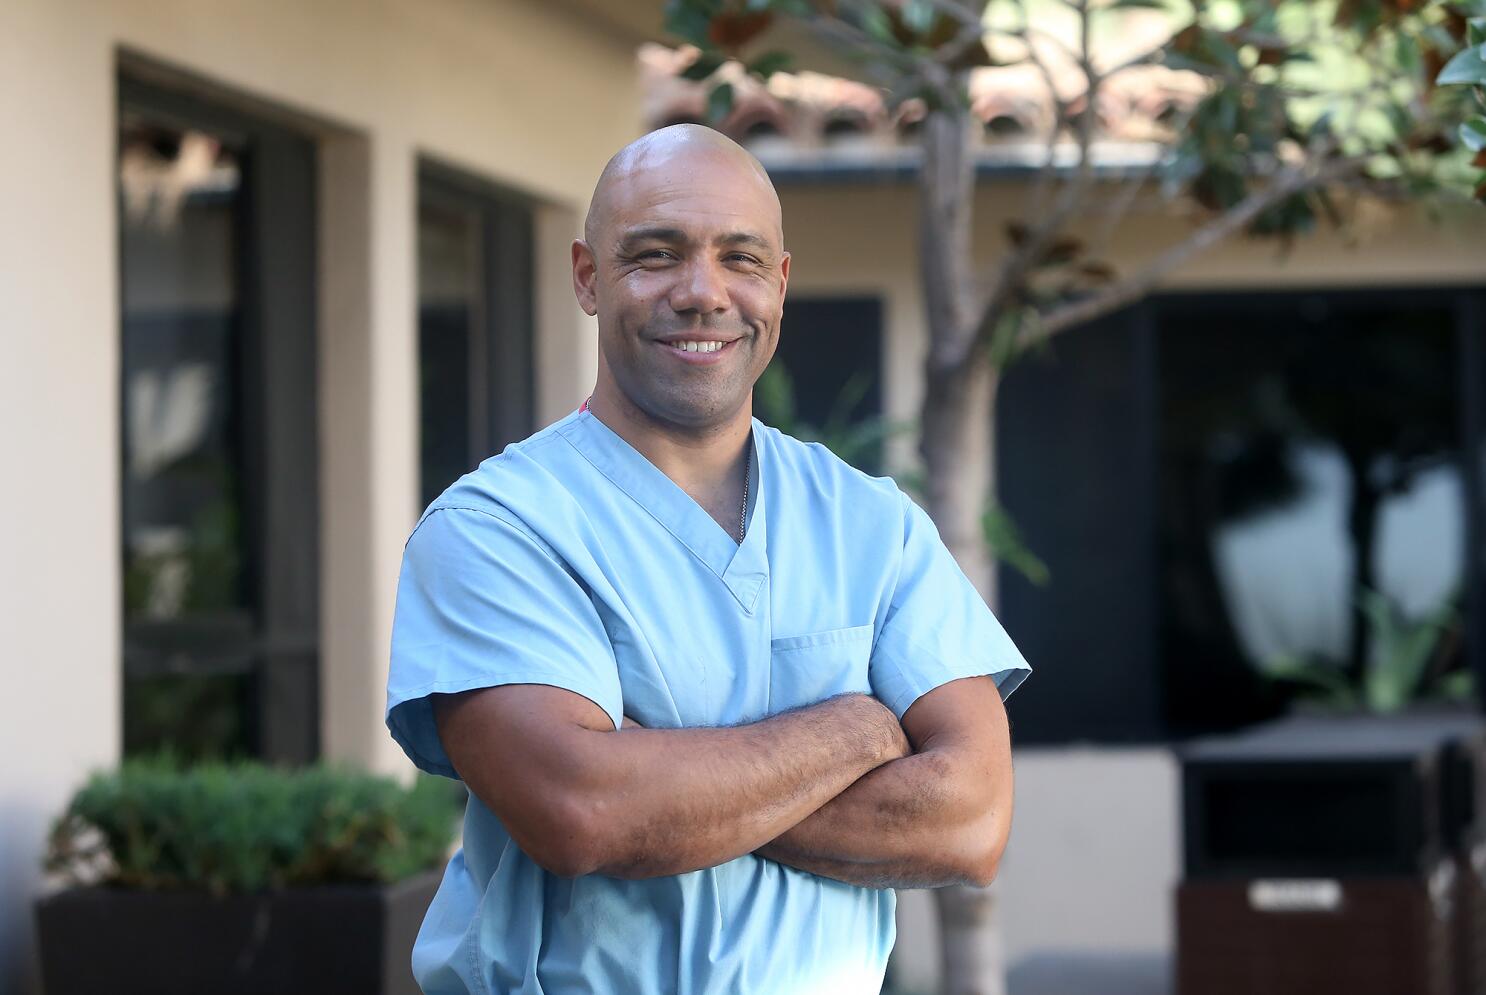 Former NFL player and Newport Beach resident finds his calling in